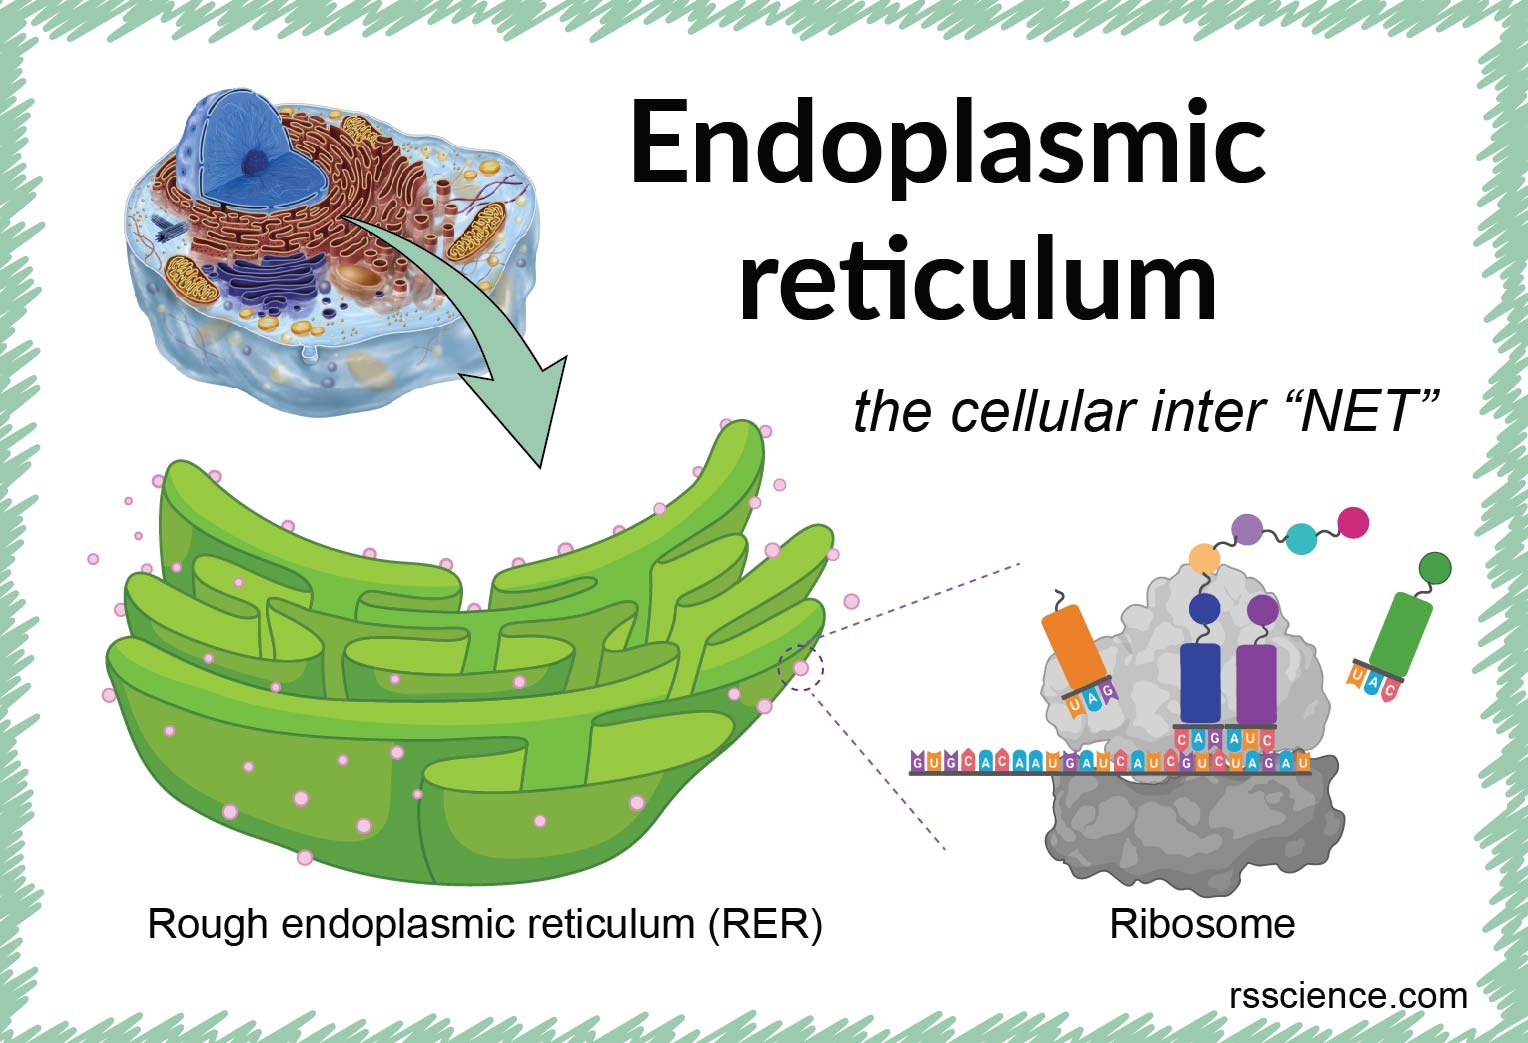 Endoplasmic reticulum - the cellular inter “NET” - definition, structure,  function, and biology